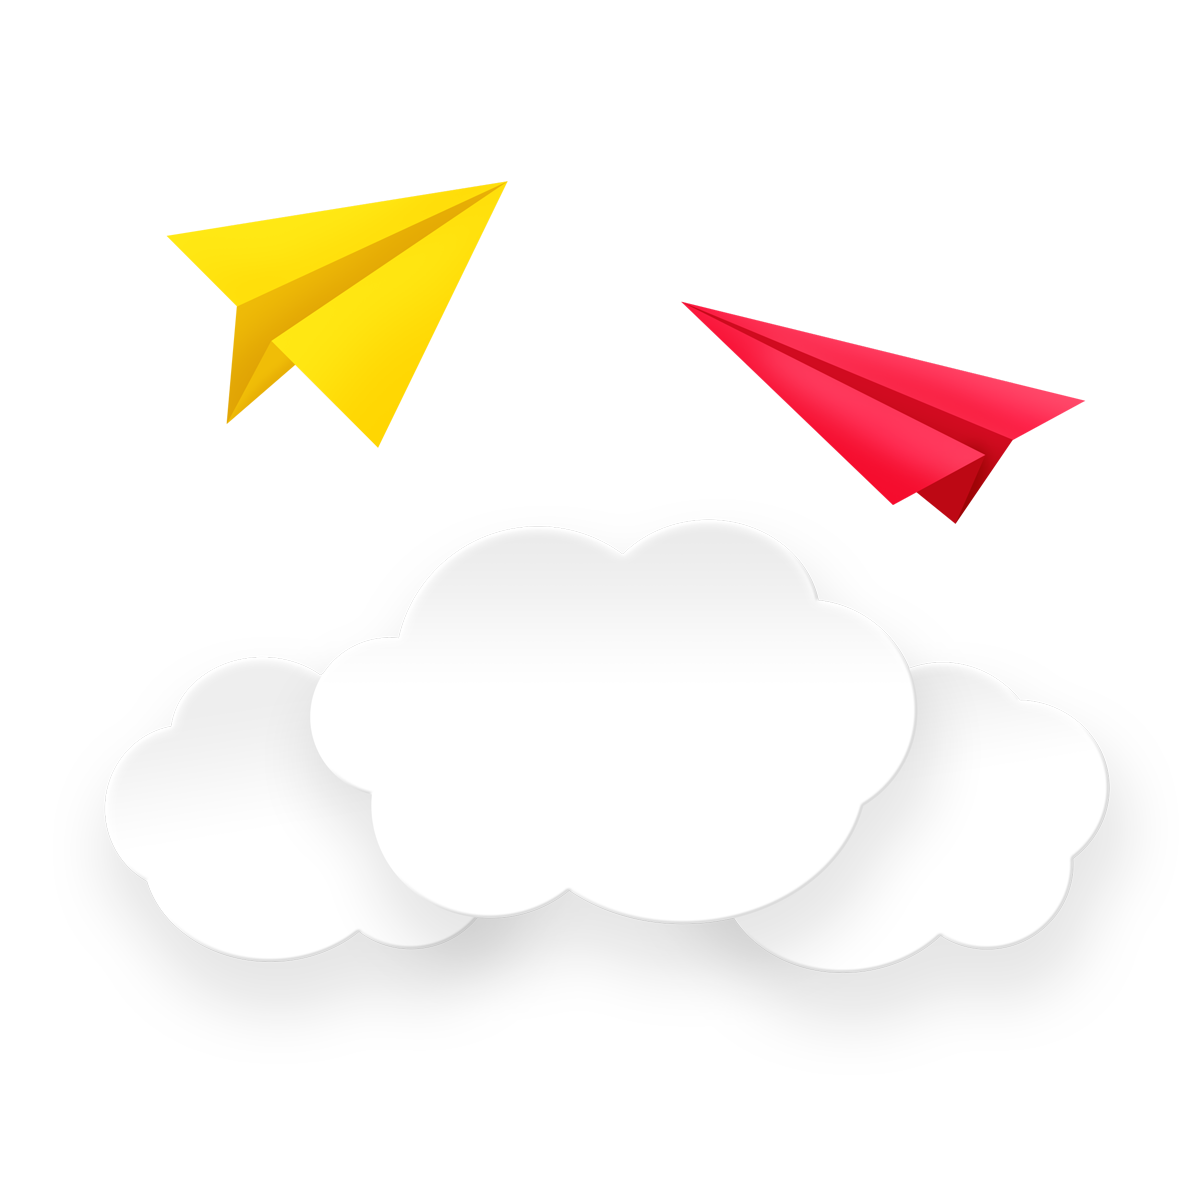 Paper Plane Origami PNG Cutout